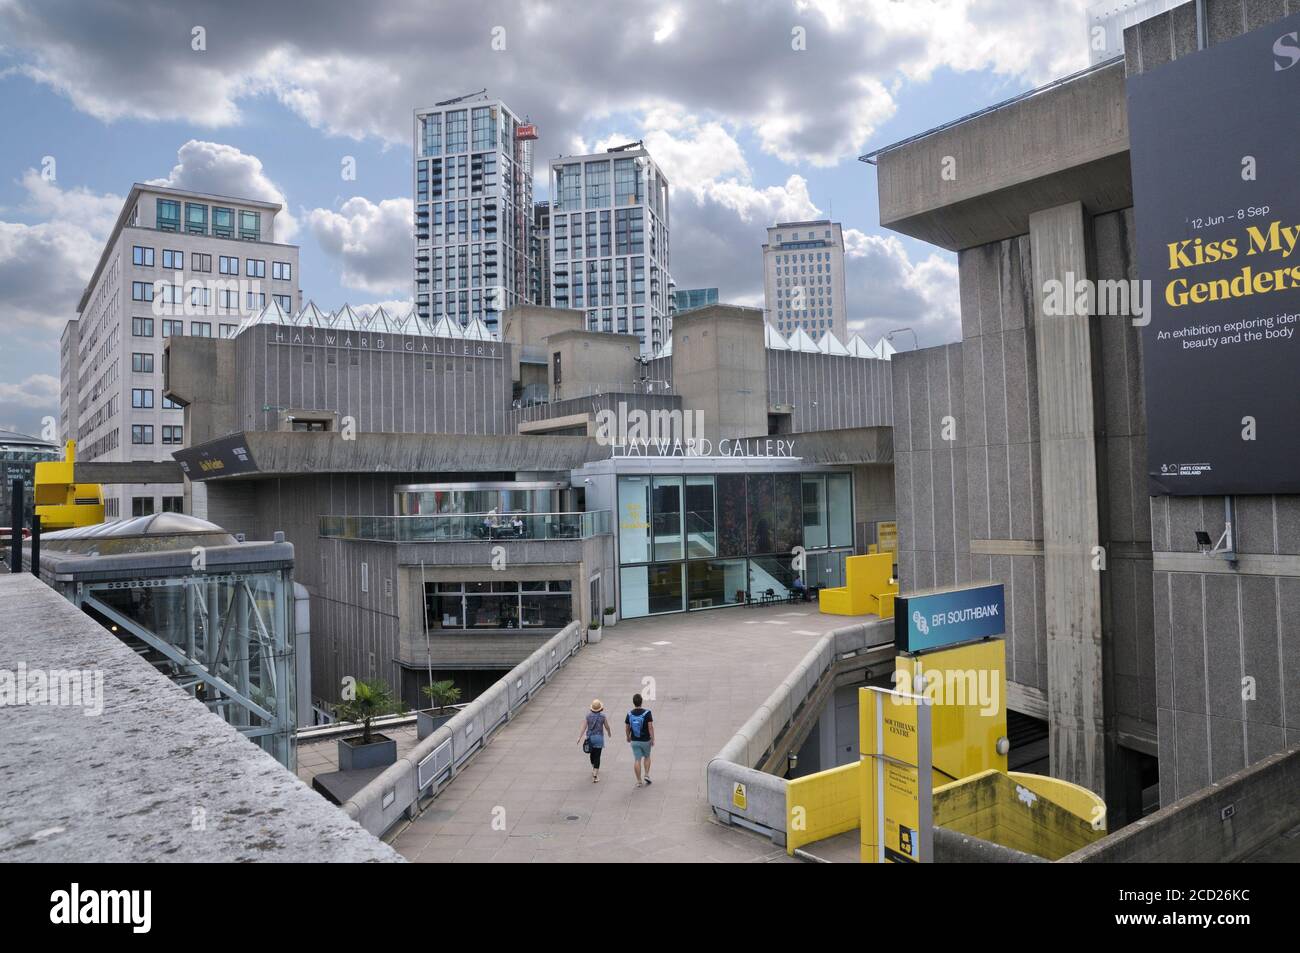 The Hayward Gallery, Southbank Center, South Bank, Londres, Angleterre, Royaume-Uni Banque D'Images